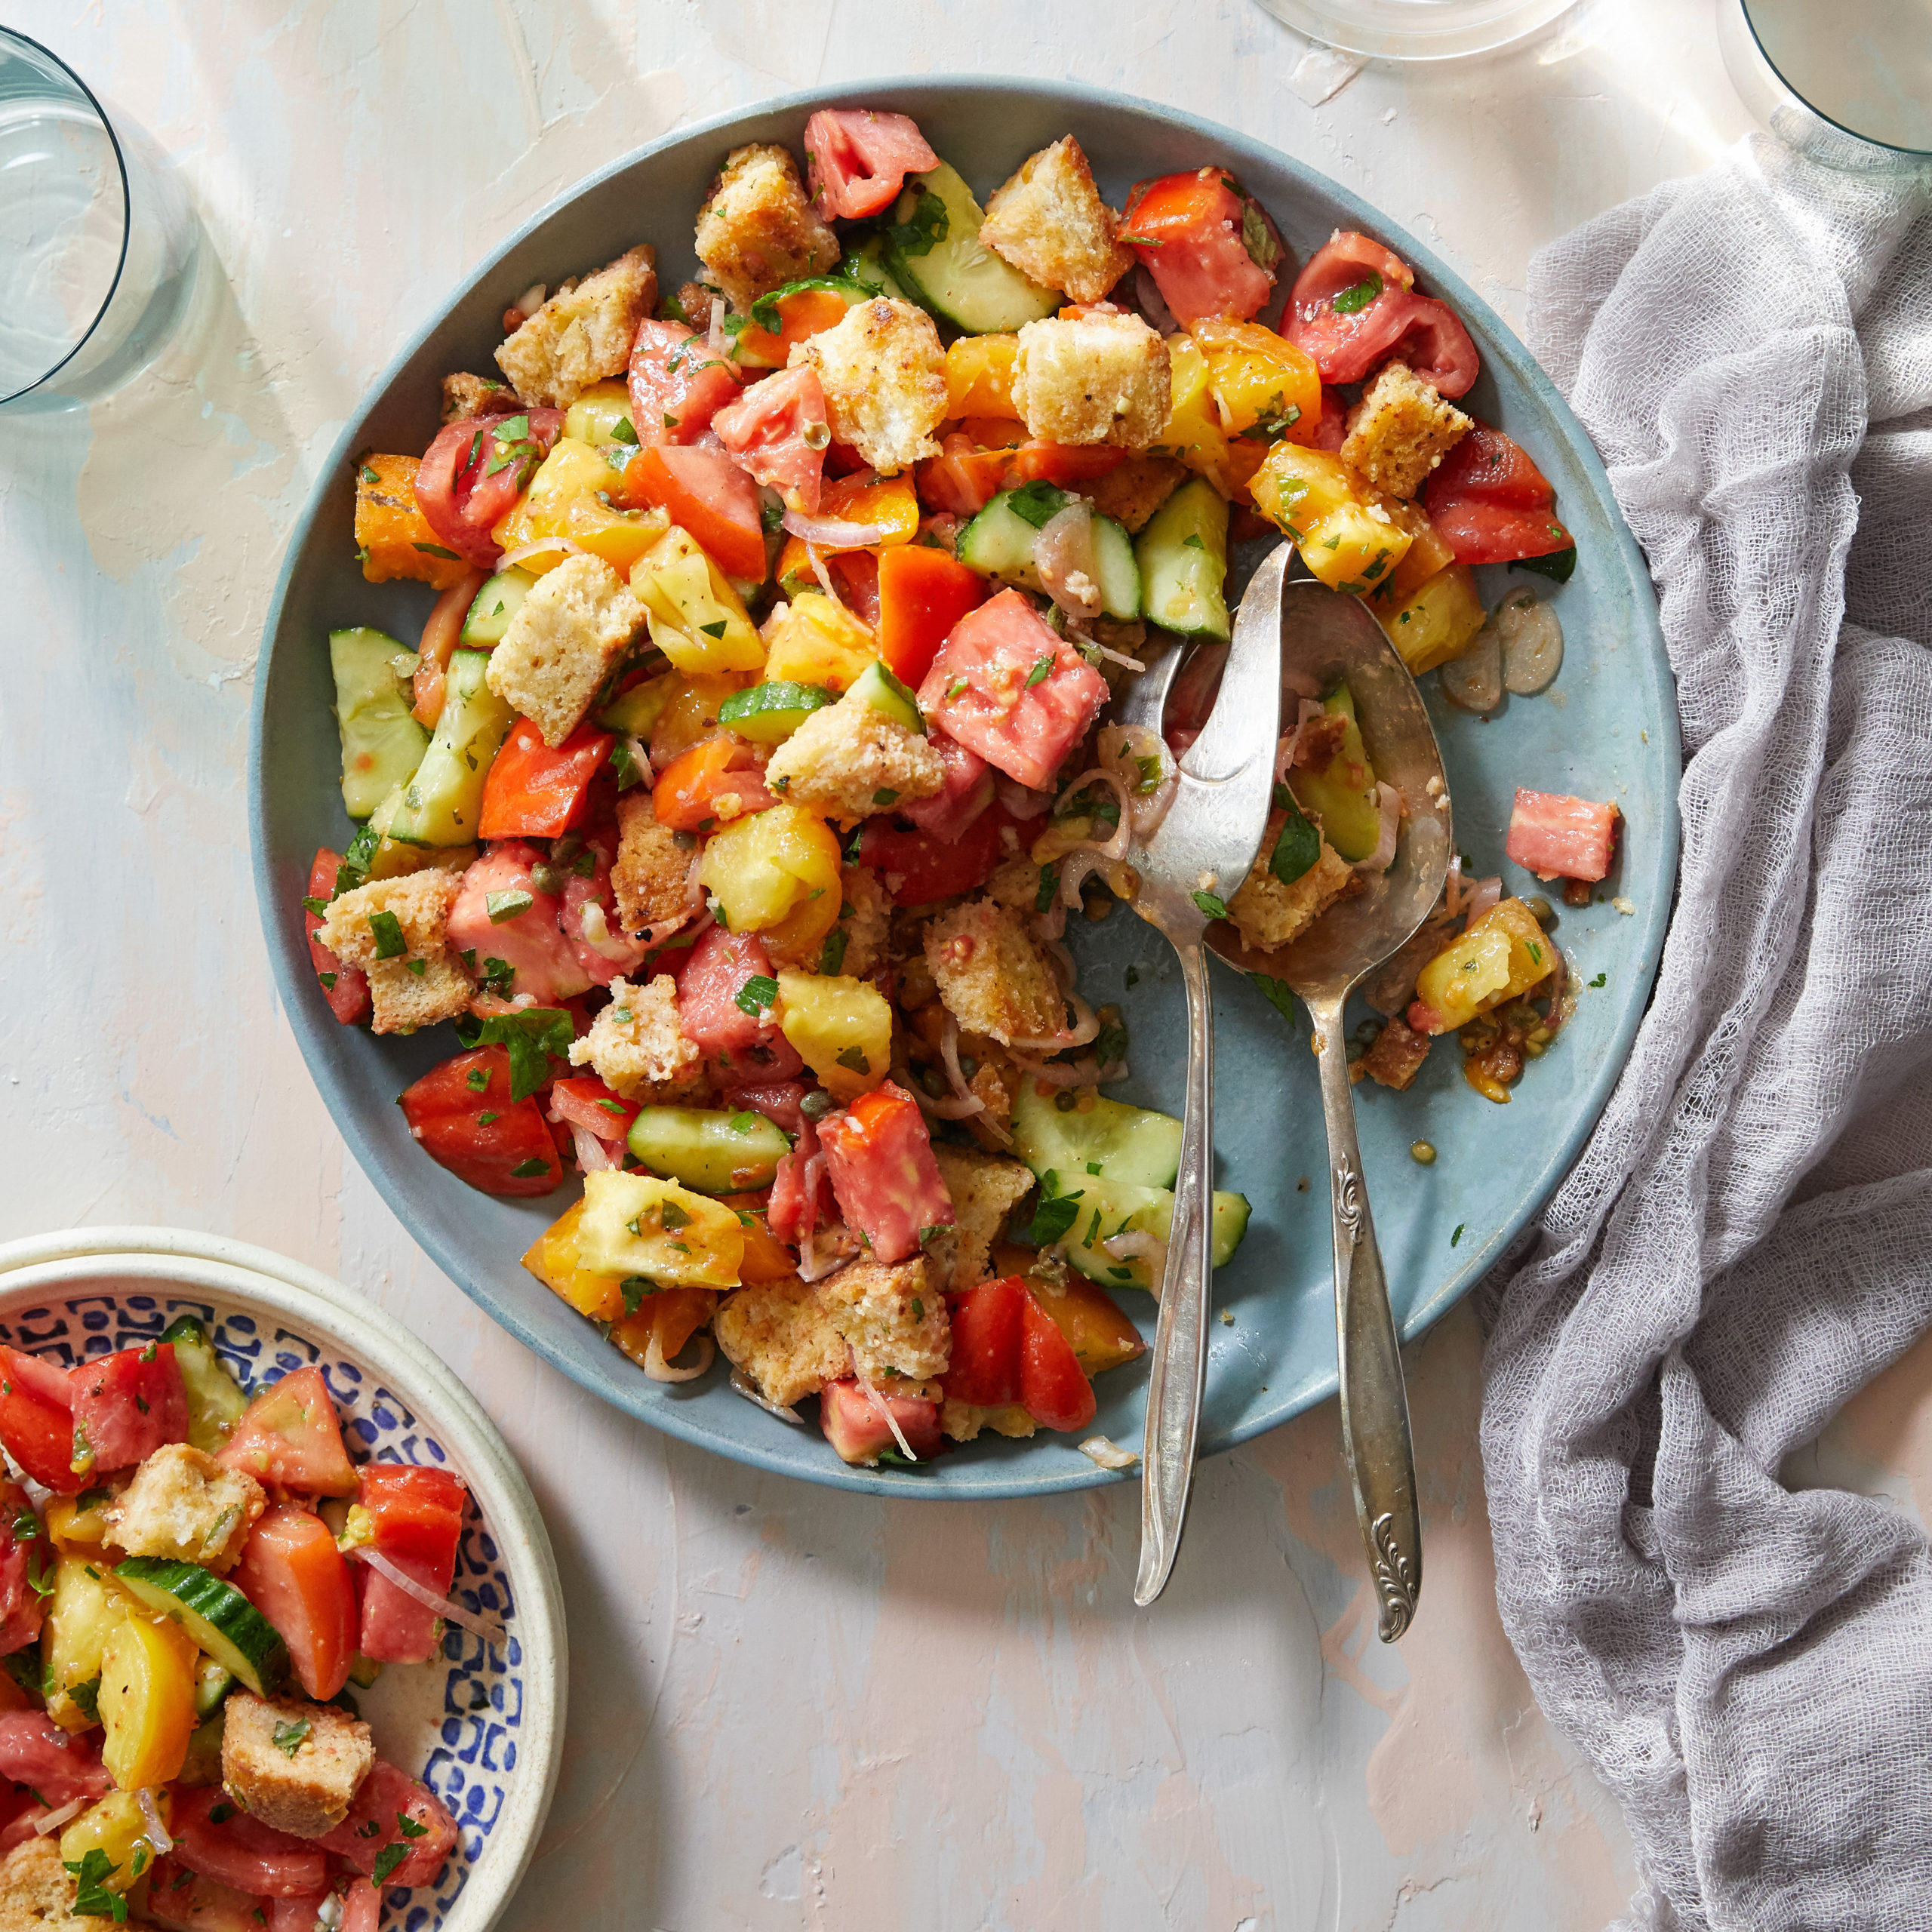 Photo of Sheela Prakash's panzanella, a salad with bread, tomatoes, cucumbers, onions and capers.